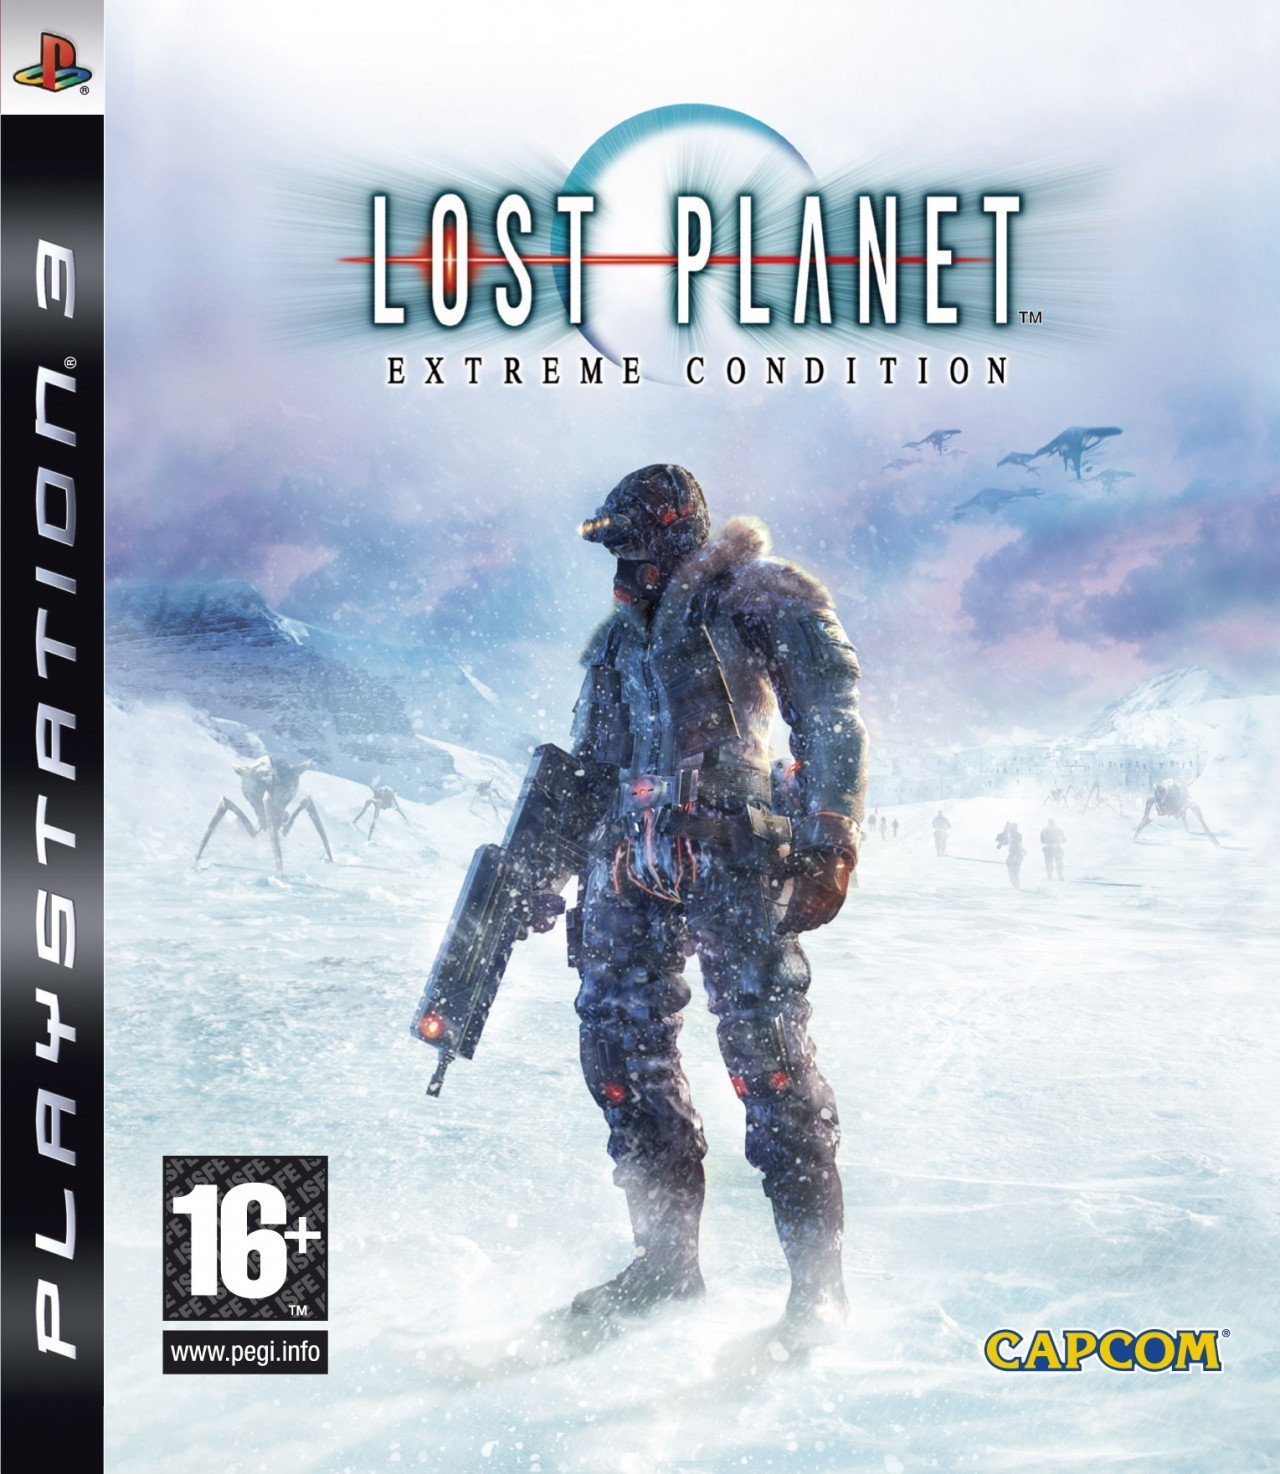 Lost planet ps3. Lost Planet Xbox 360. Lost Planet extreme condition ps3. PLAYSTATION 3 Lost Planet. Lost Planet 1 ps3.